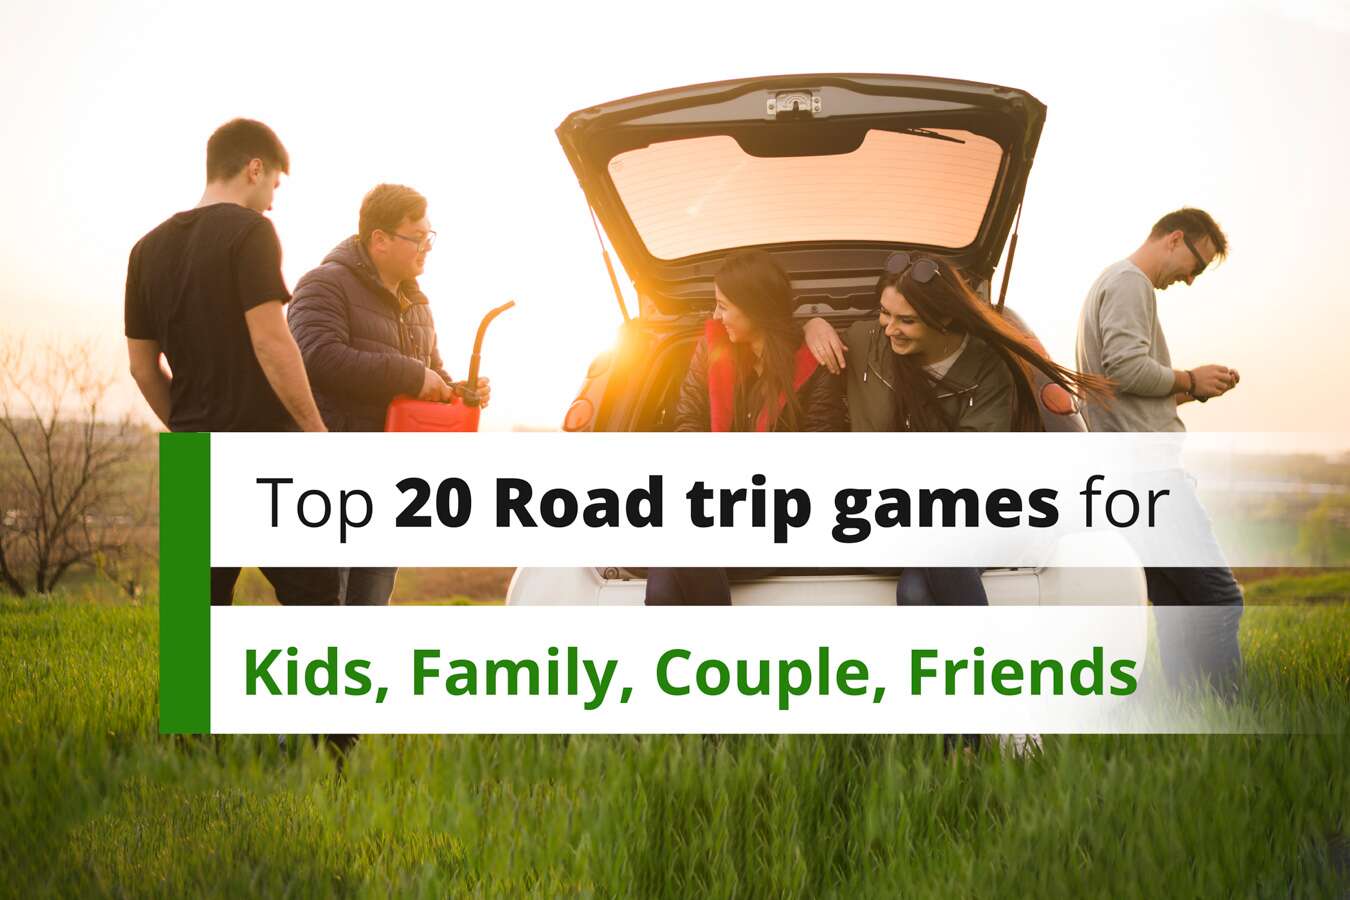 15 road trip games that'll make the drive a highlight of the trip